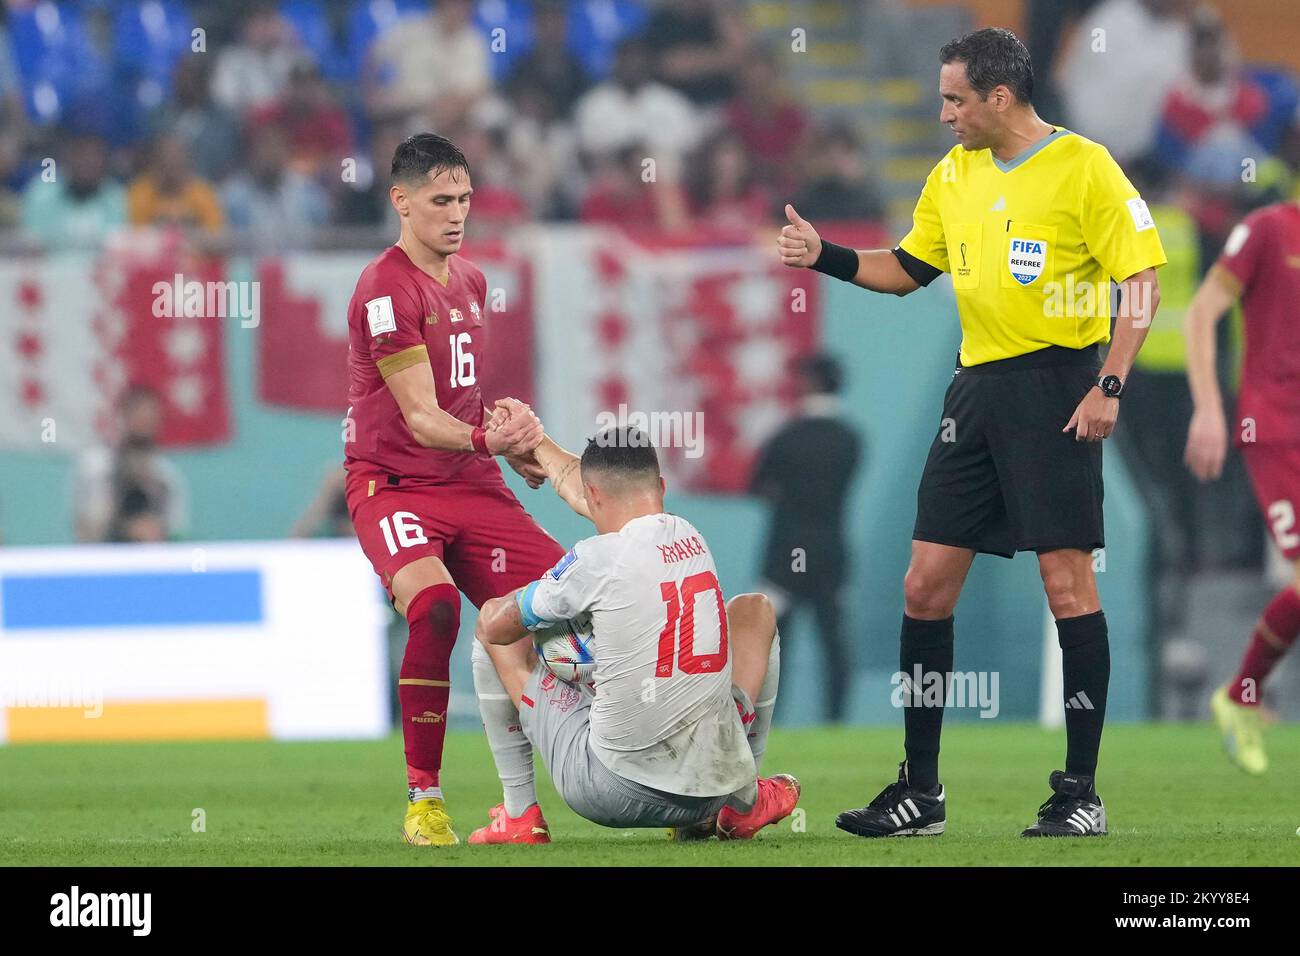 Doha, Qatar. 2nd Dec, 2022. Sasa Lukic (L) of Serbia helps Granit Xhaka of Switzerland up during the Group G match between Serbia and Switzerland at the 2022 FIFA World Cup at Stadium 974 in Doha, Qatar, Dec. 2, 2022. Credit: Zheng Huansong/Xinhua/Alamy Live News Stock Photo